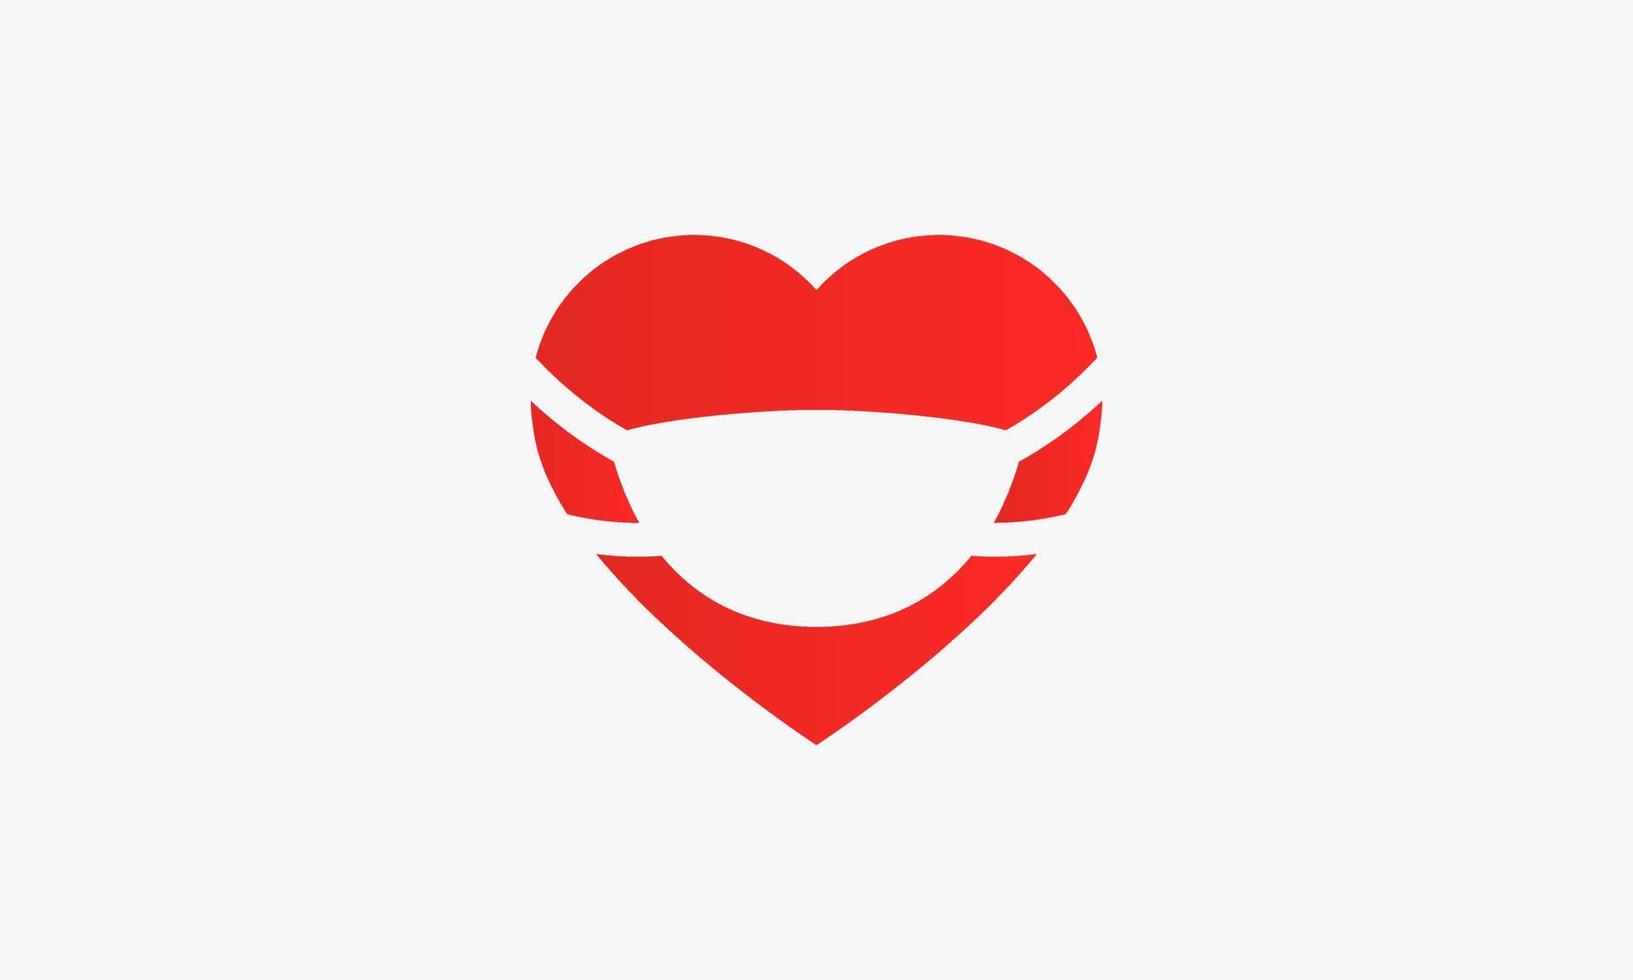 red heart medical mask icon vector illustration.